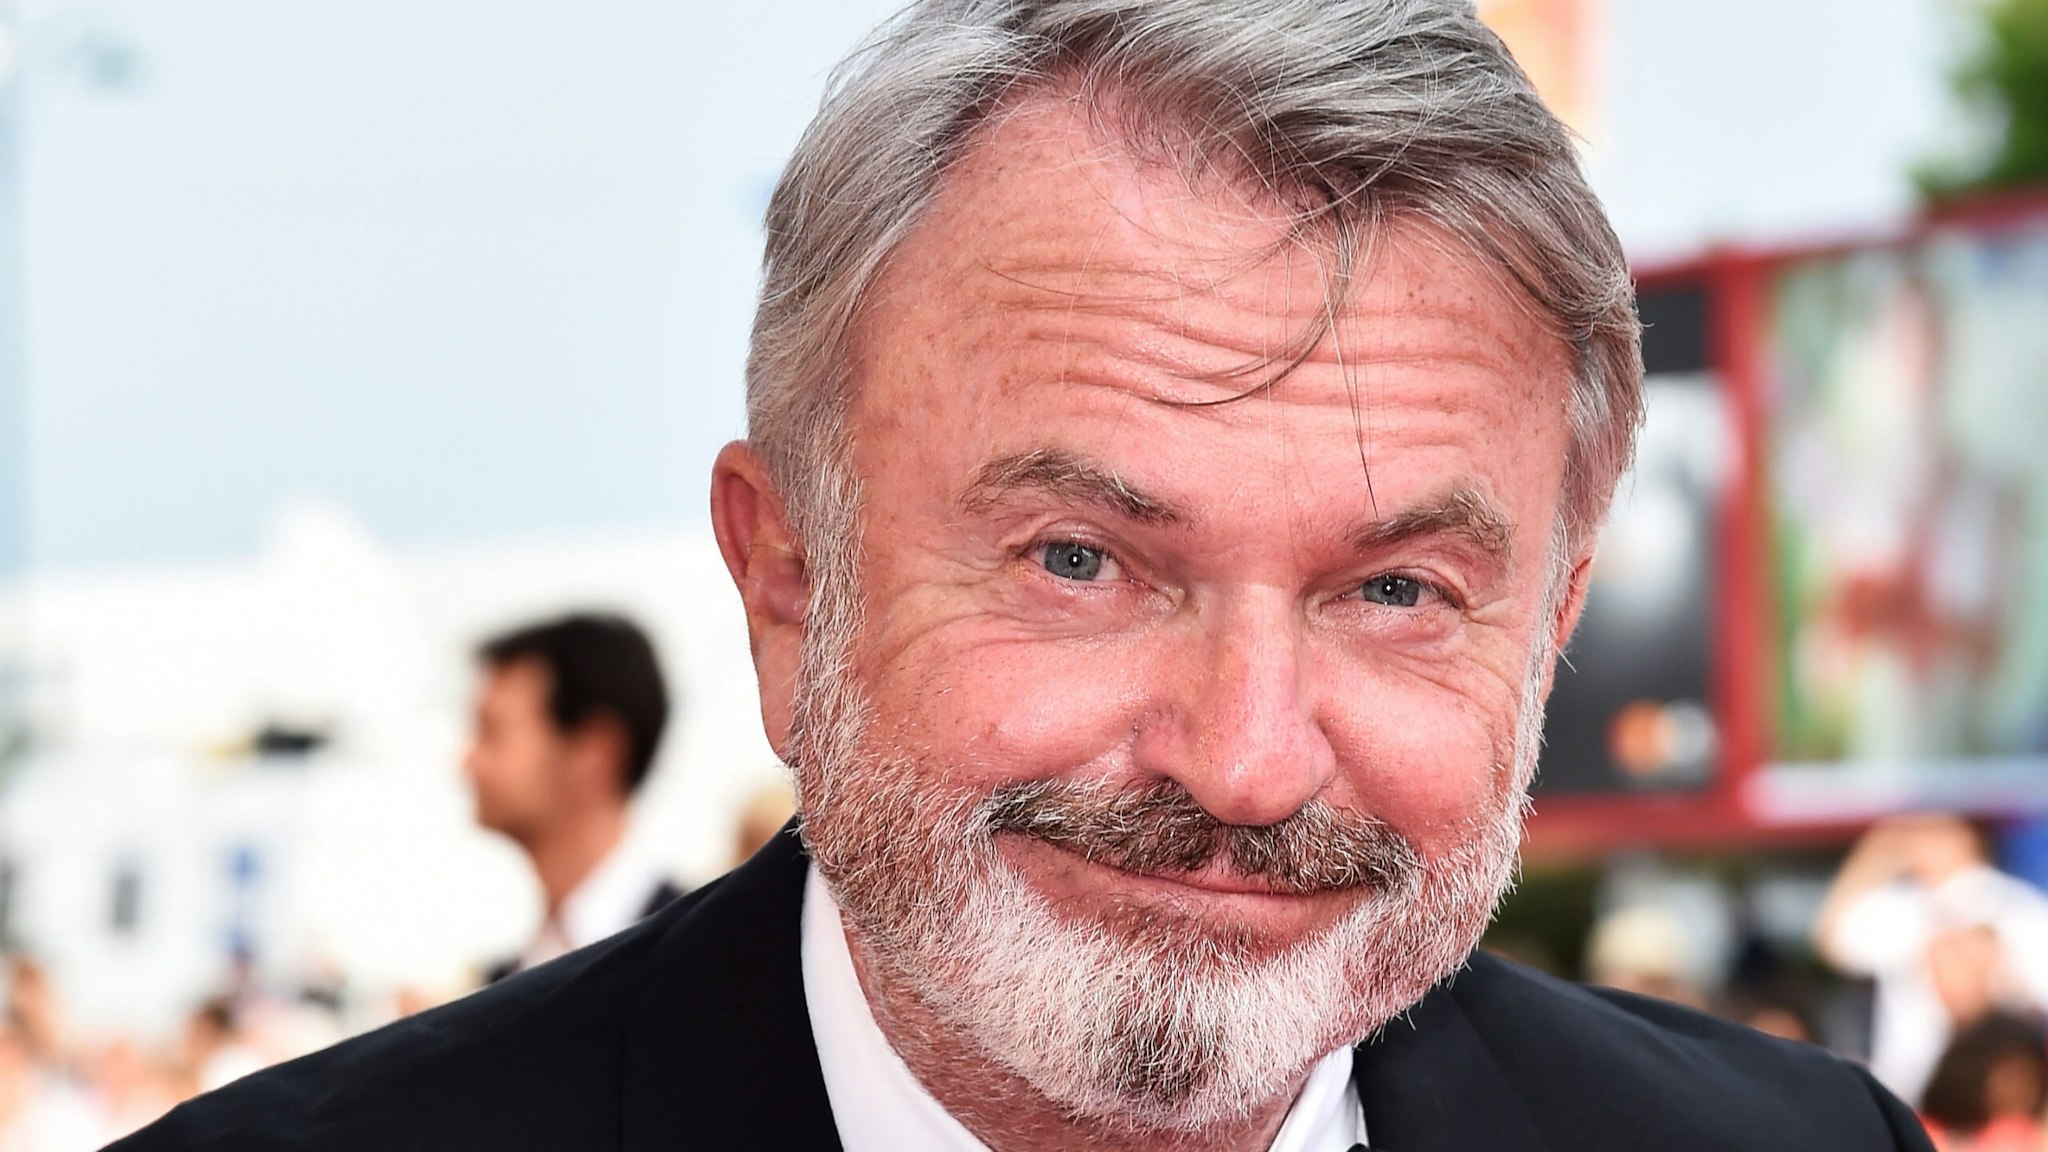 VENICE, ITALY - SEPTEMBER 06: Sam Neill walks the red carpet ahead of the 'Sweet Country' screening during the 74th Venice Film Festival at Sala Grande on September 6, 2017 in Venice, Italy.